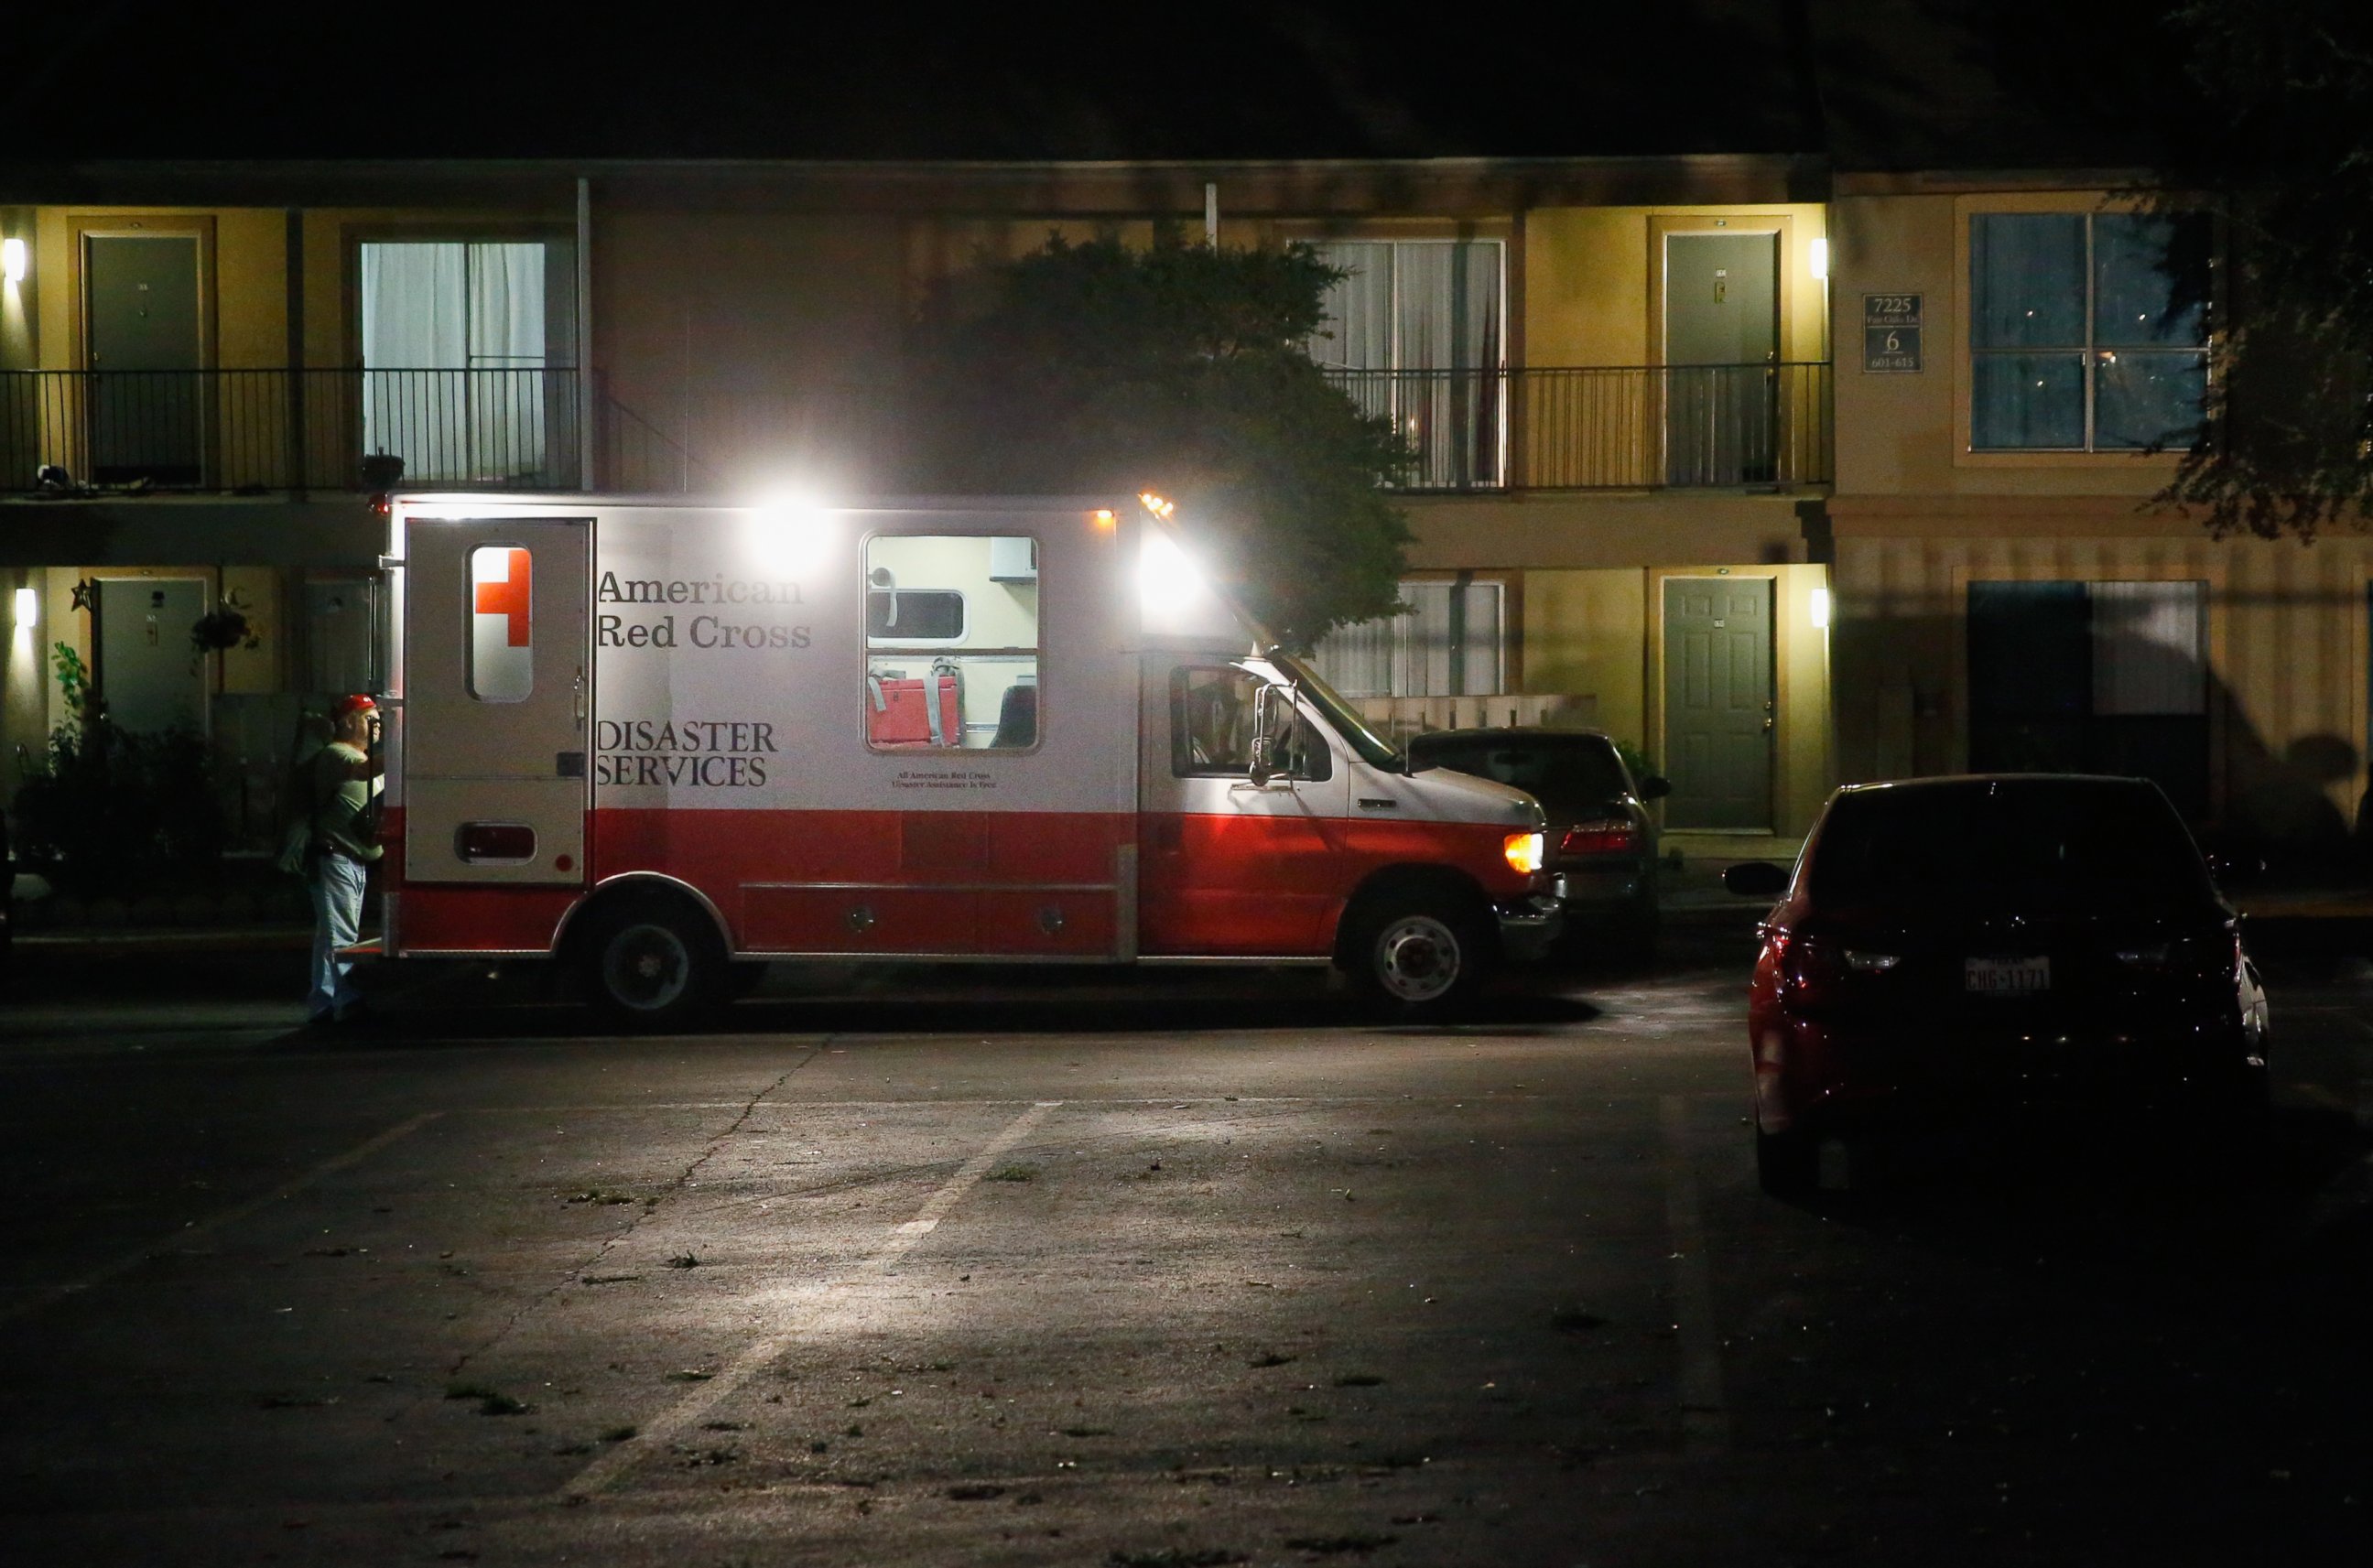 PHOTO: Volunteers from the Red Cross deliver blankets and other supplies to a unit at the Ivy Apartments, where the confirmed Ebola virus patient was staying, on Oct. 2, 2014 in Dallas, Texas. 